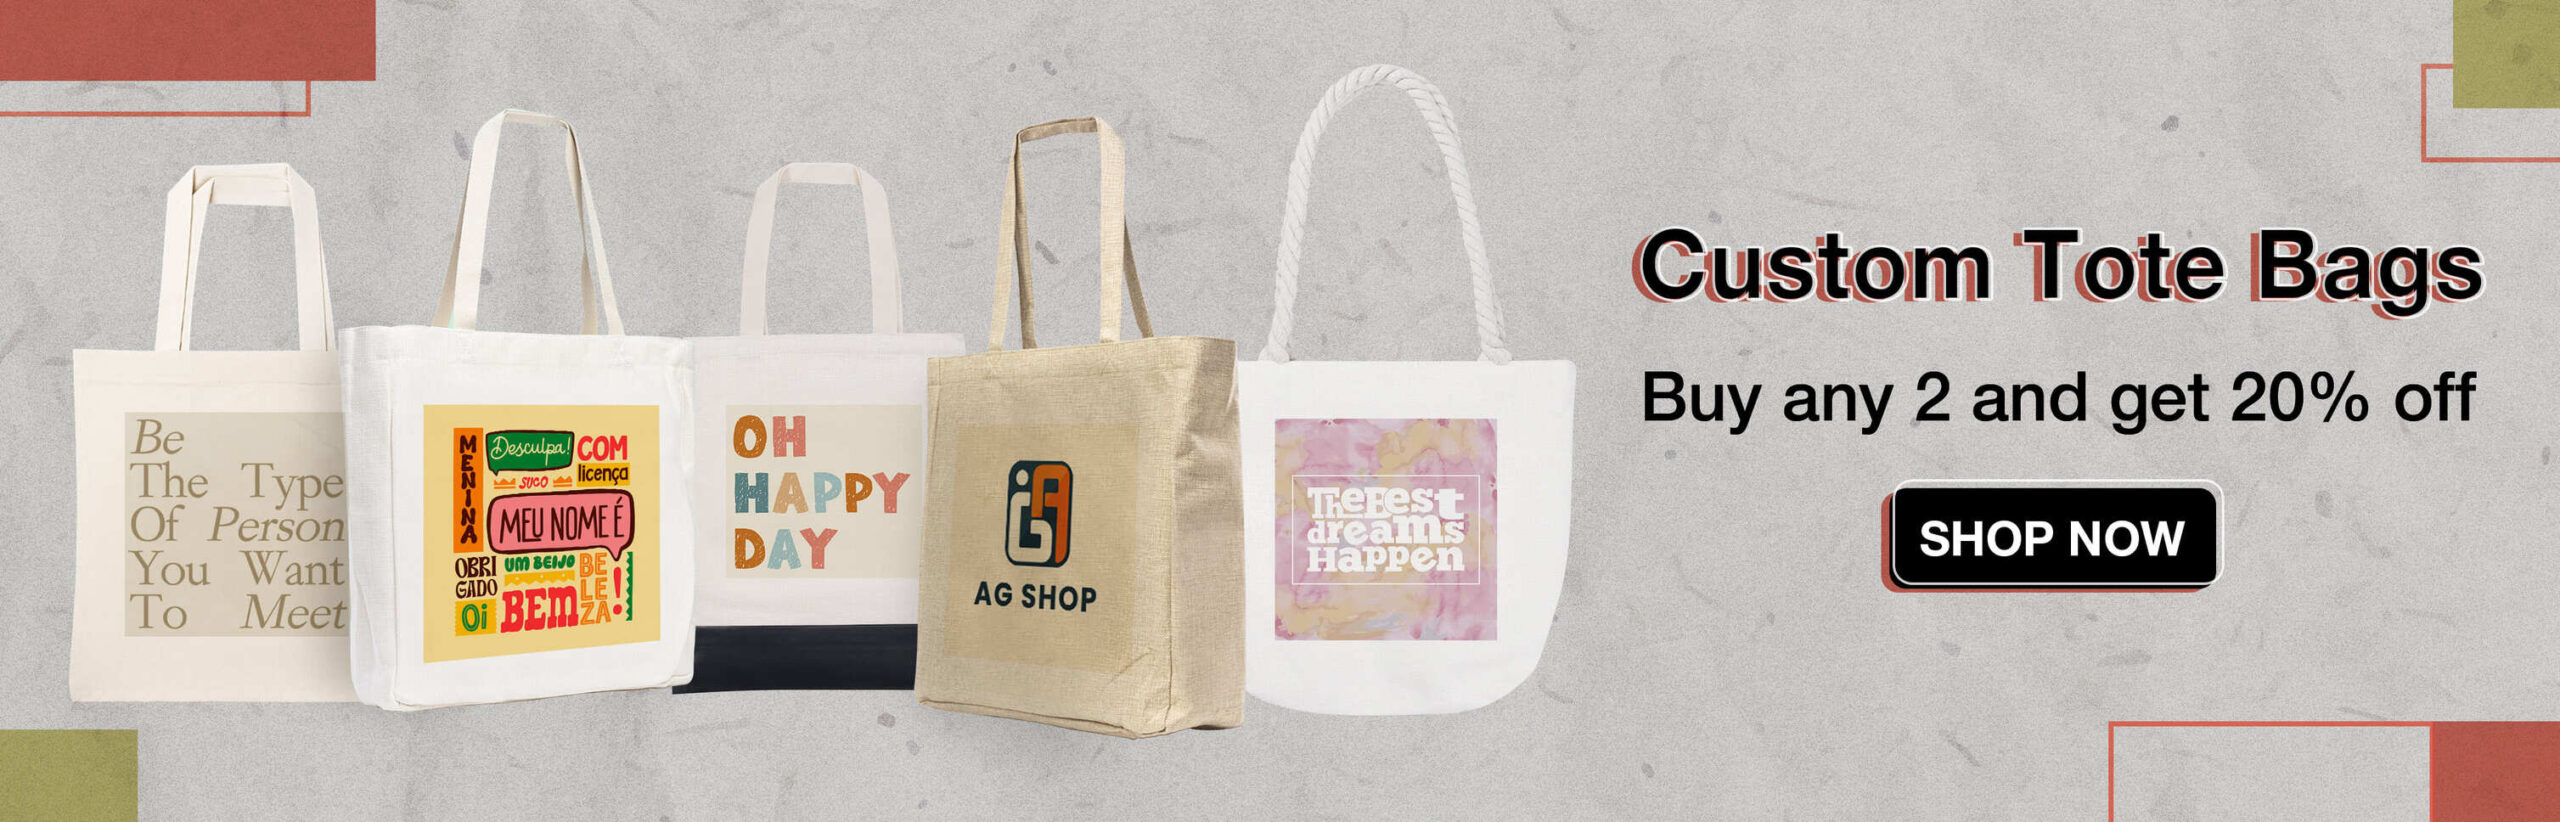 homepage-banner-category-tote bag